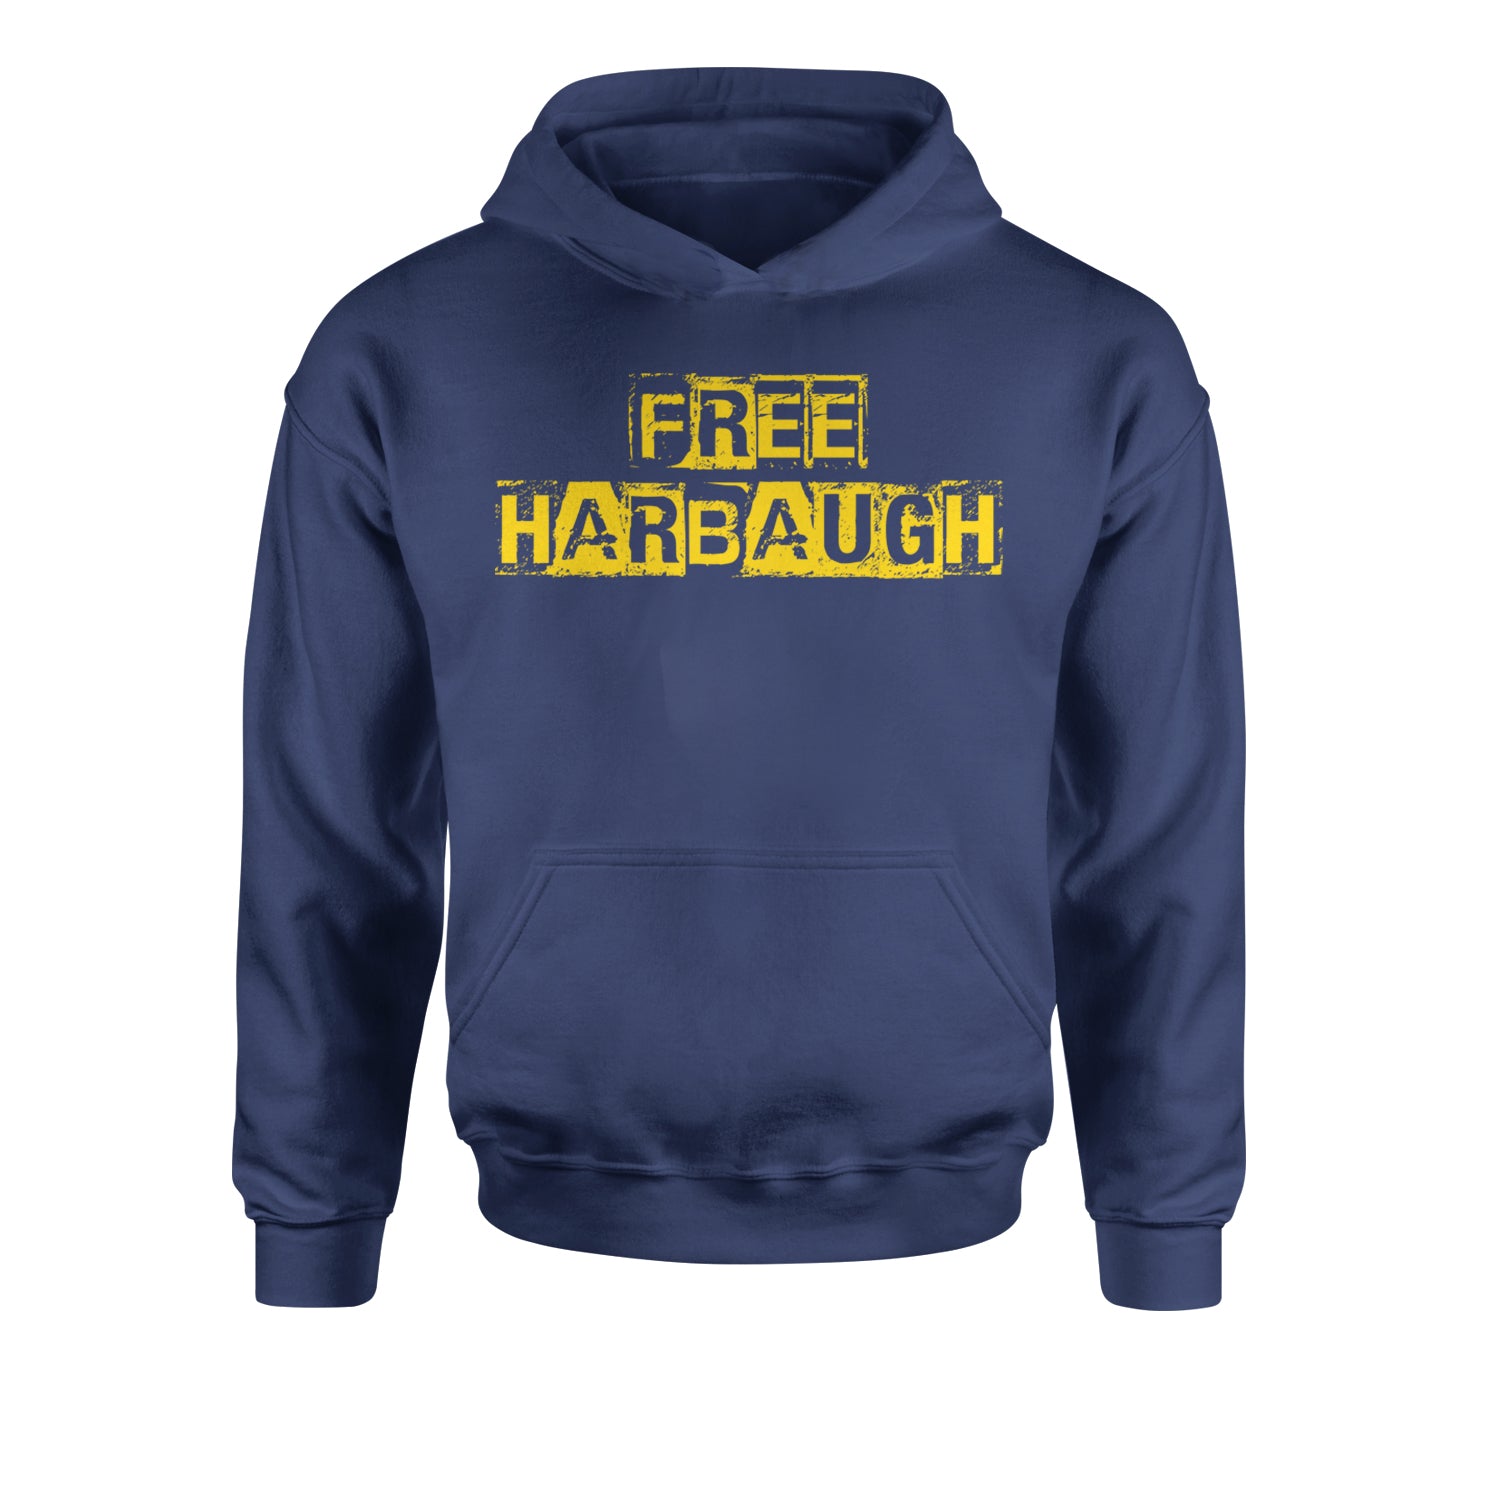 Free Harbaugh Release Our Coach Youth-Sized Hoodie